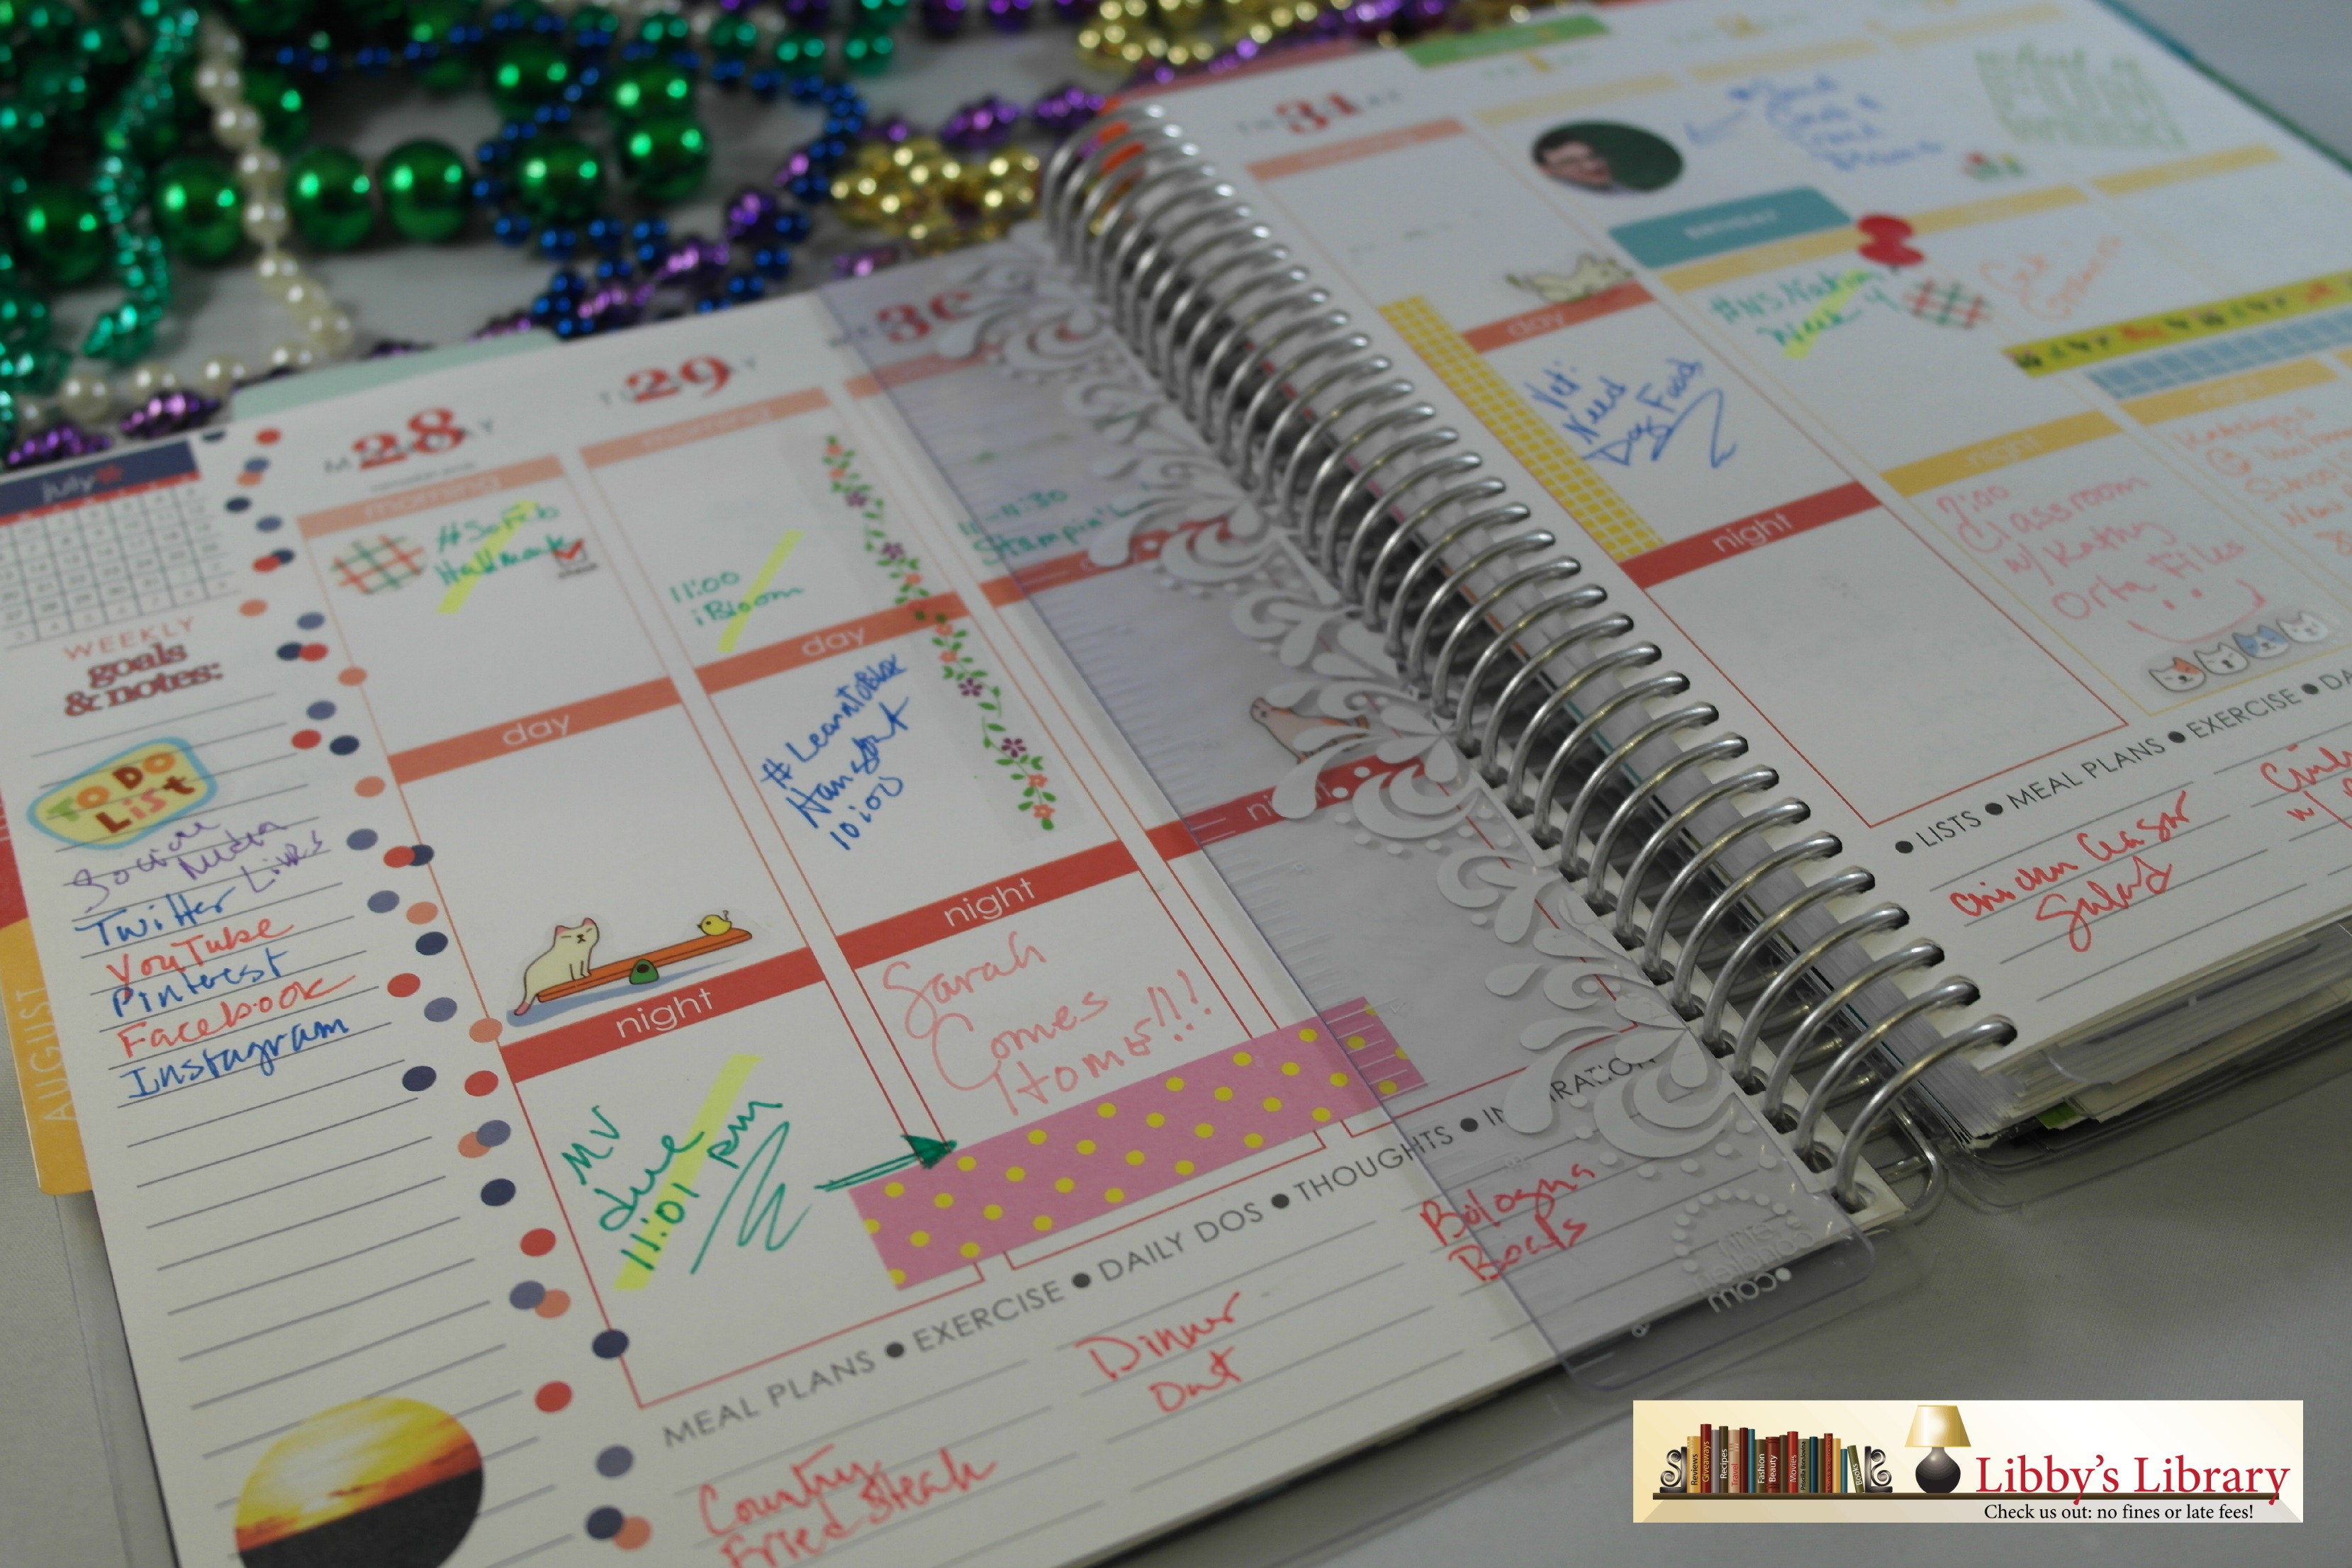 Planner Peek Tour with Libby